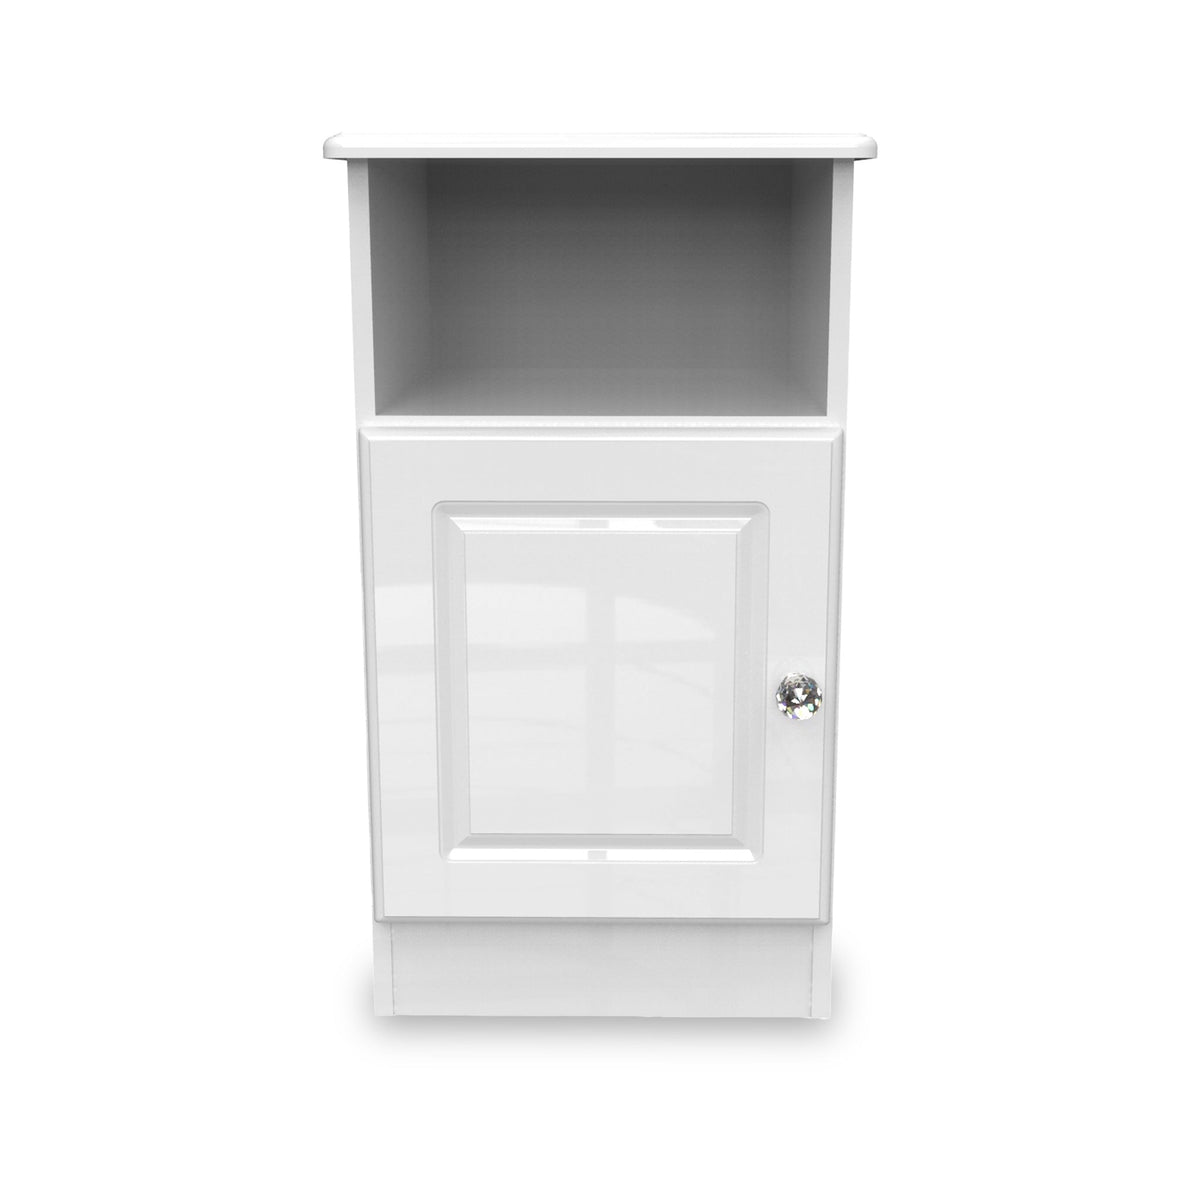 Kinsley White Gloss 1 Door with Open Shelf Cabinet from Roseland